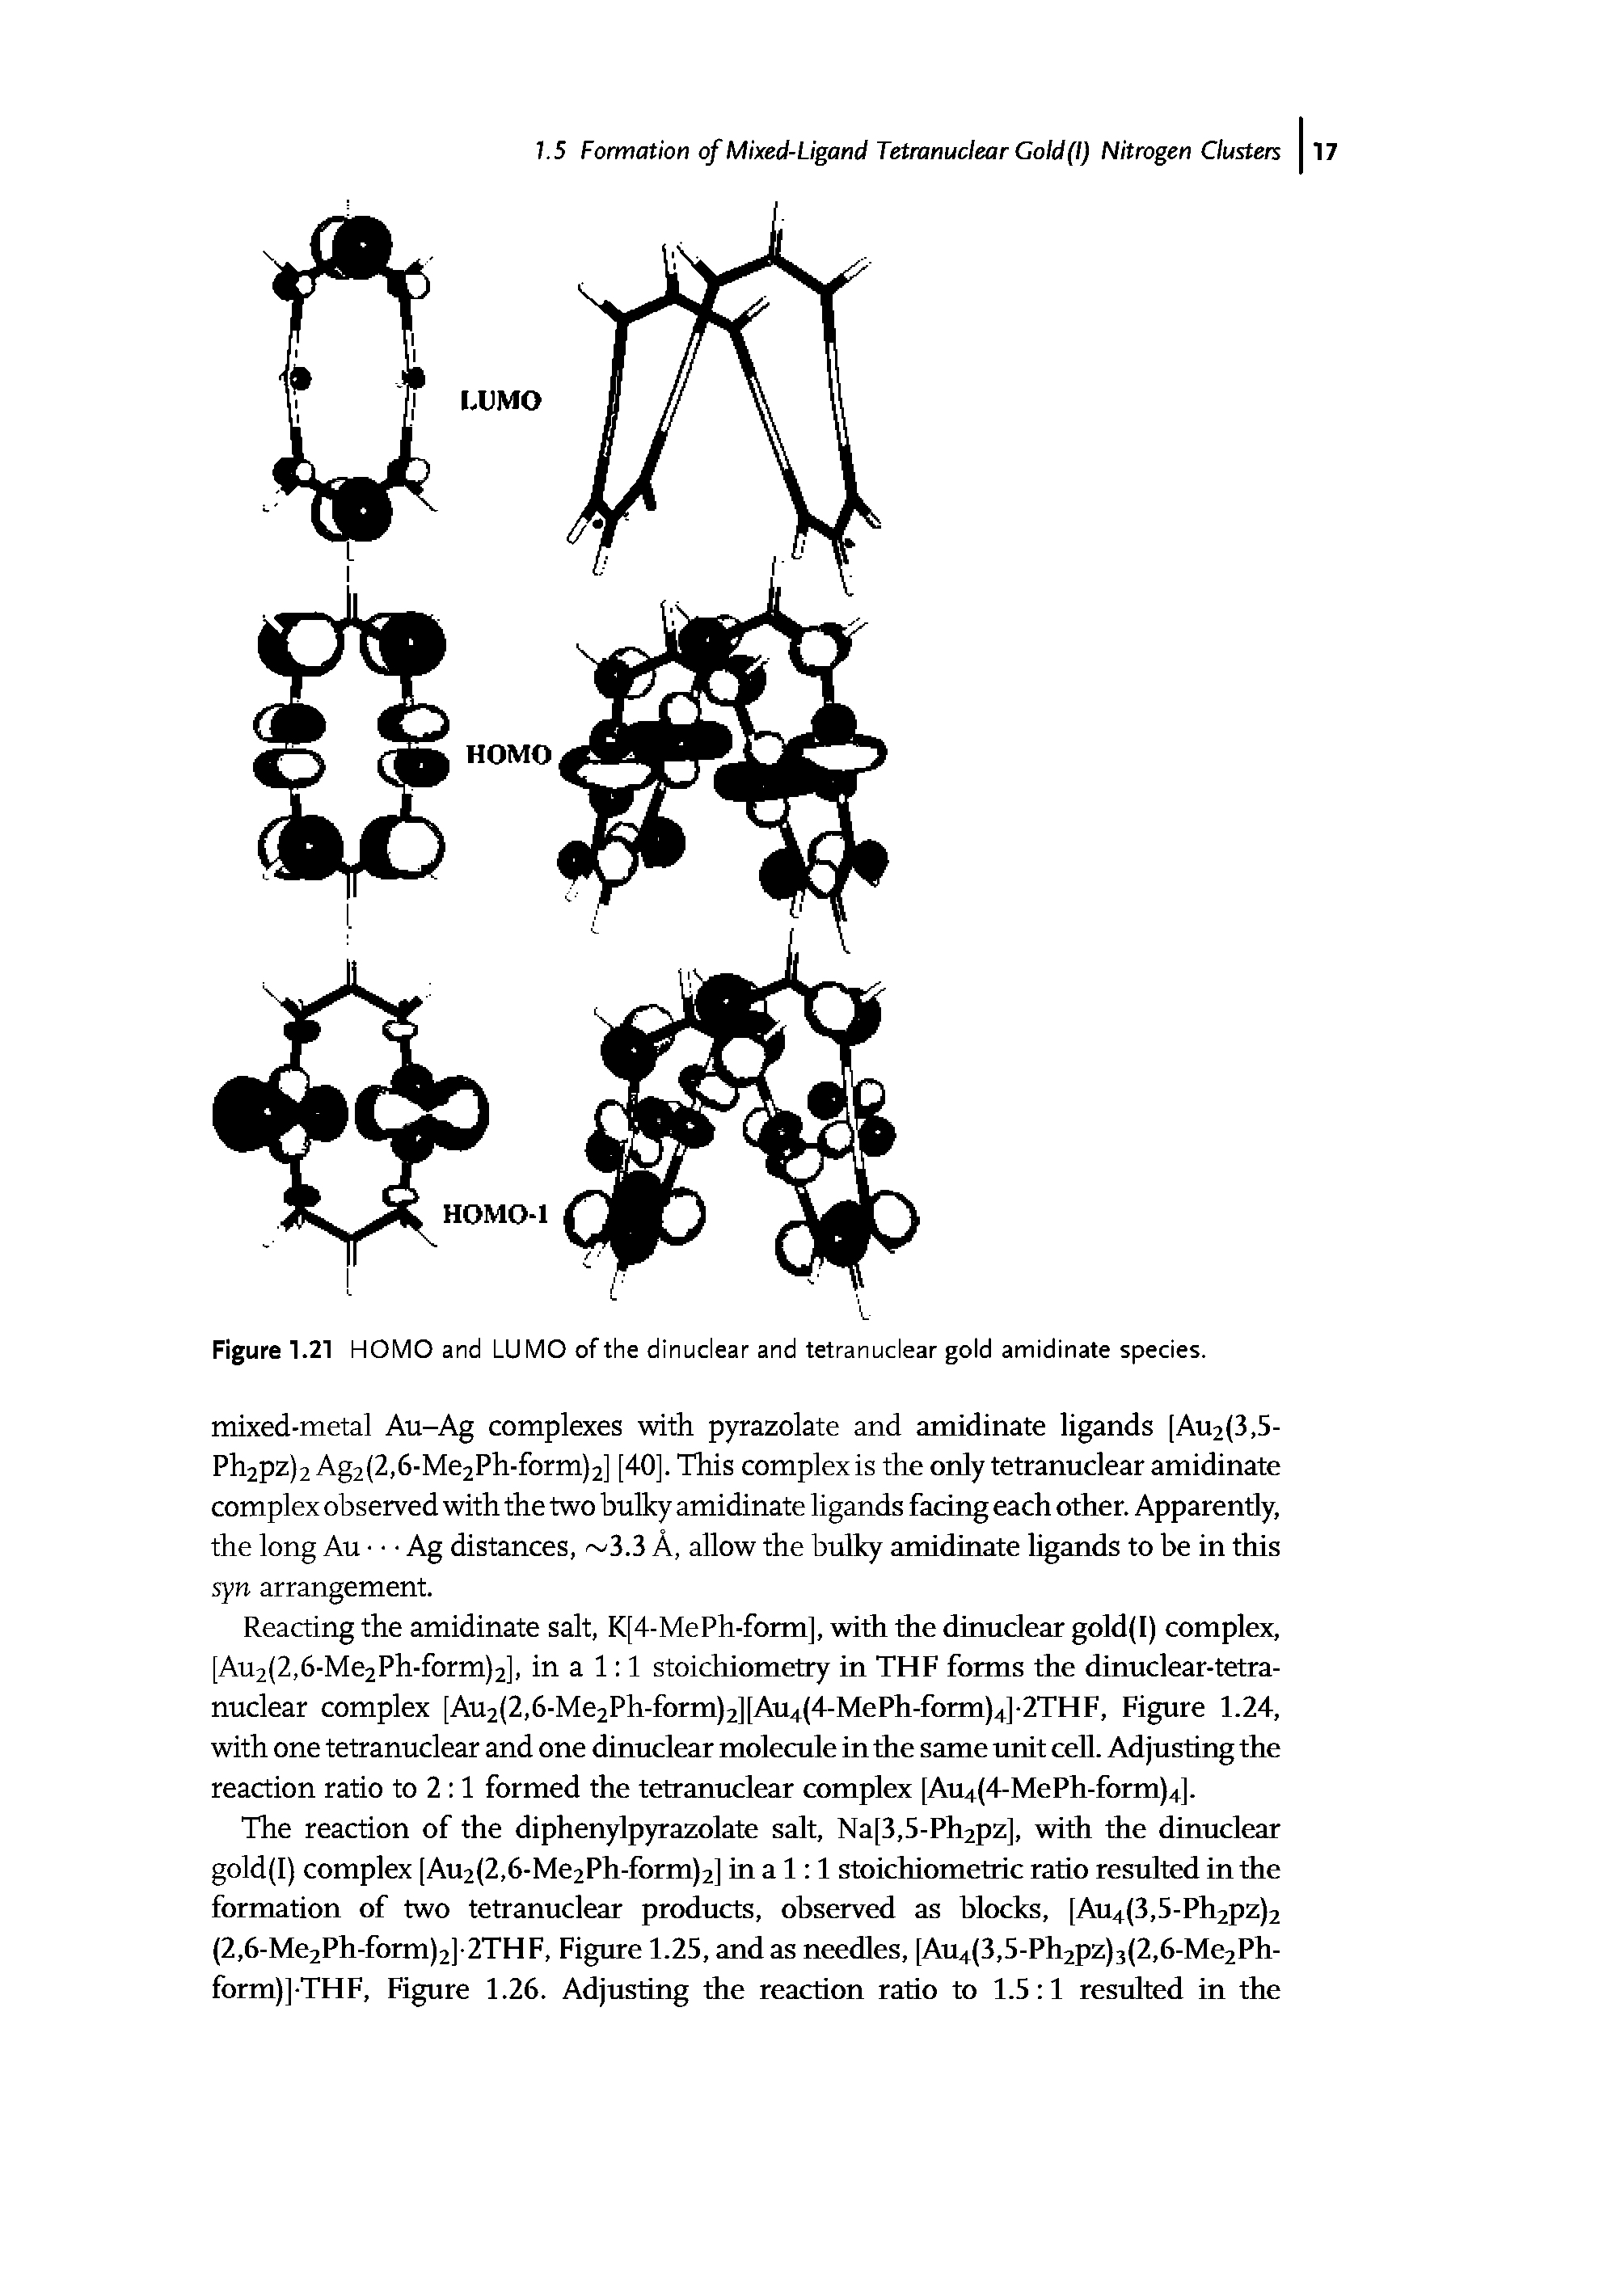 Figure 1.21 HOMO and LUMO of the dinuclear and tetranuclear gold amidinate species.